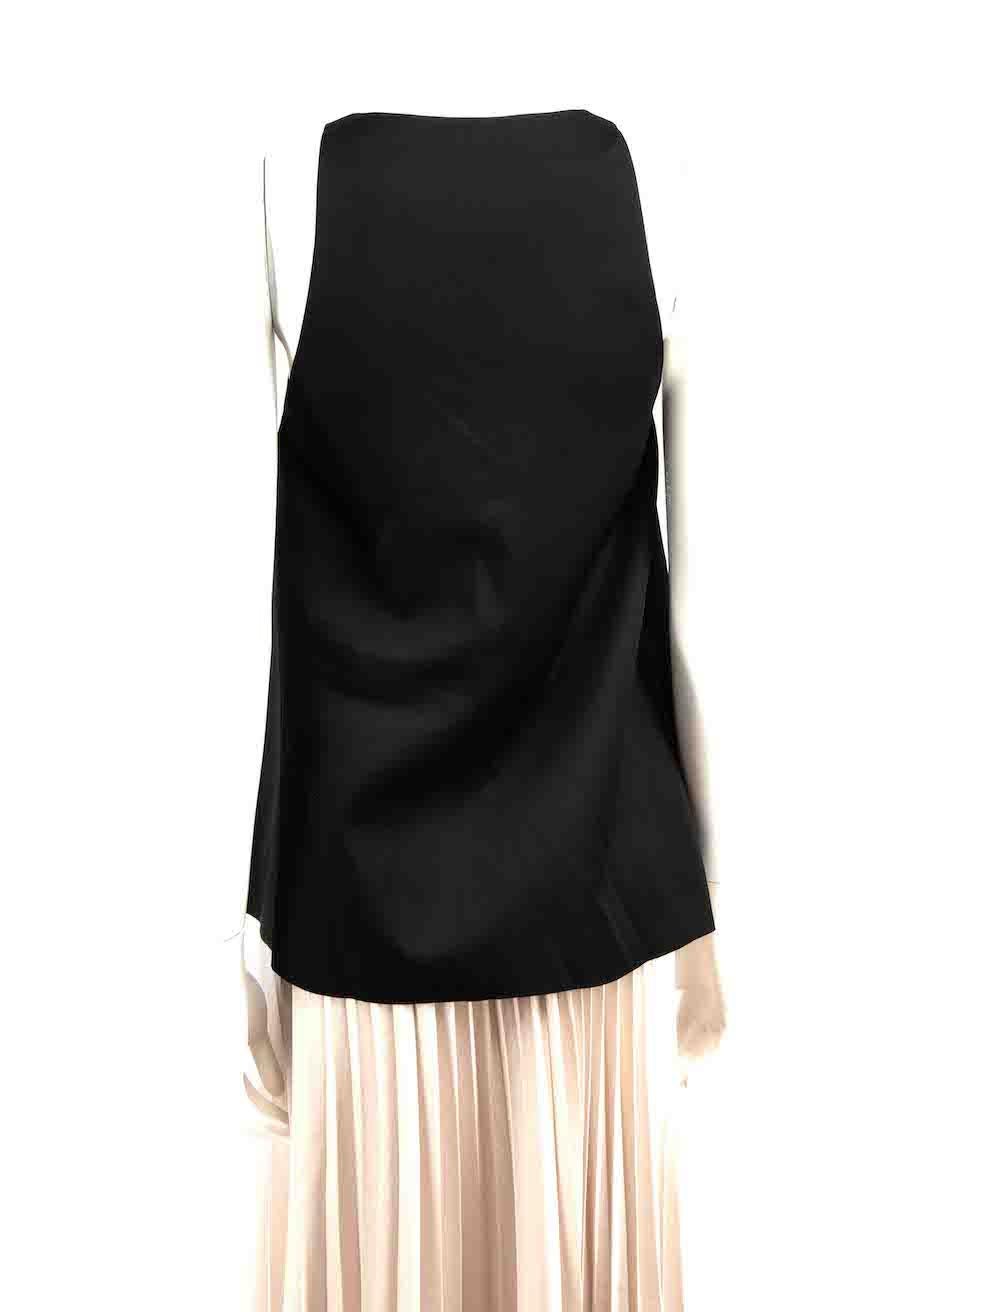 Acler Black V-Neck Sleeveless Trapeze Top Size XS In Excellent Condition For Sale In London, GB